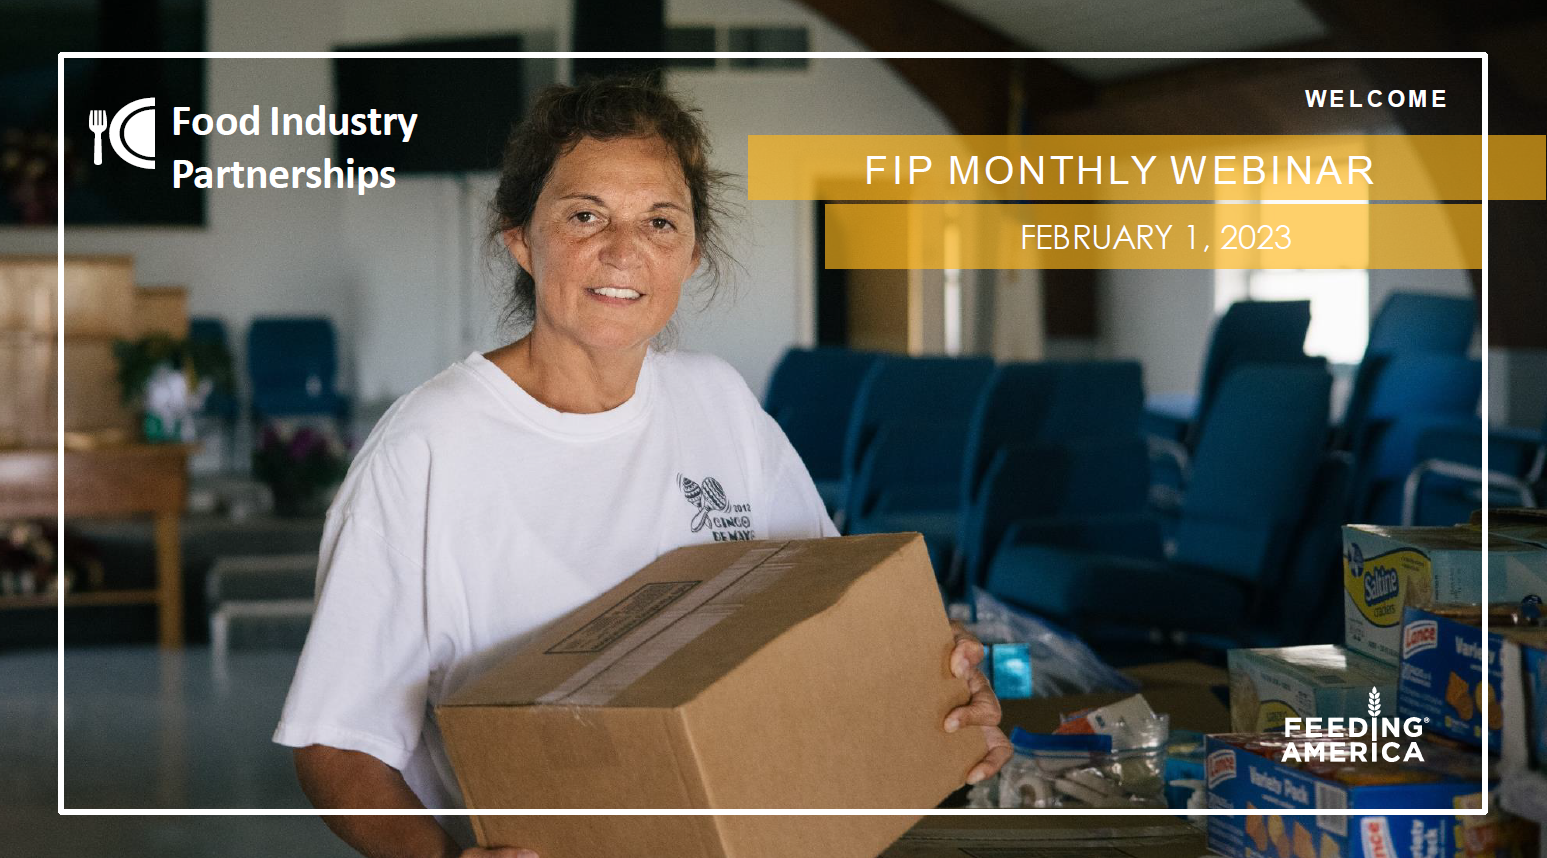 Food Industry Partnerships: Supply Chain and FIP Account Updates, February 2023